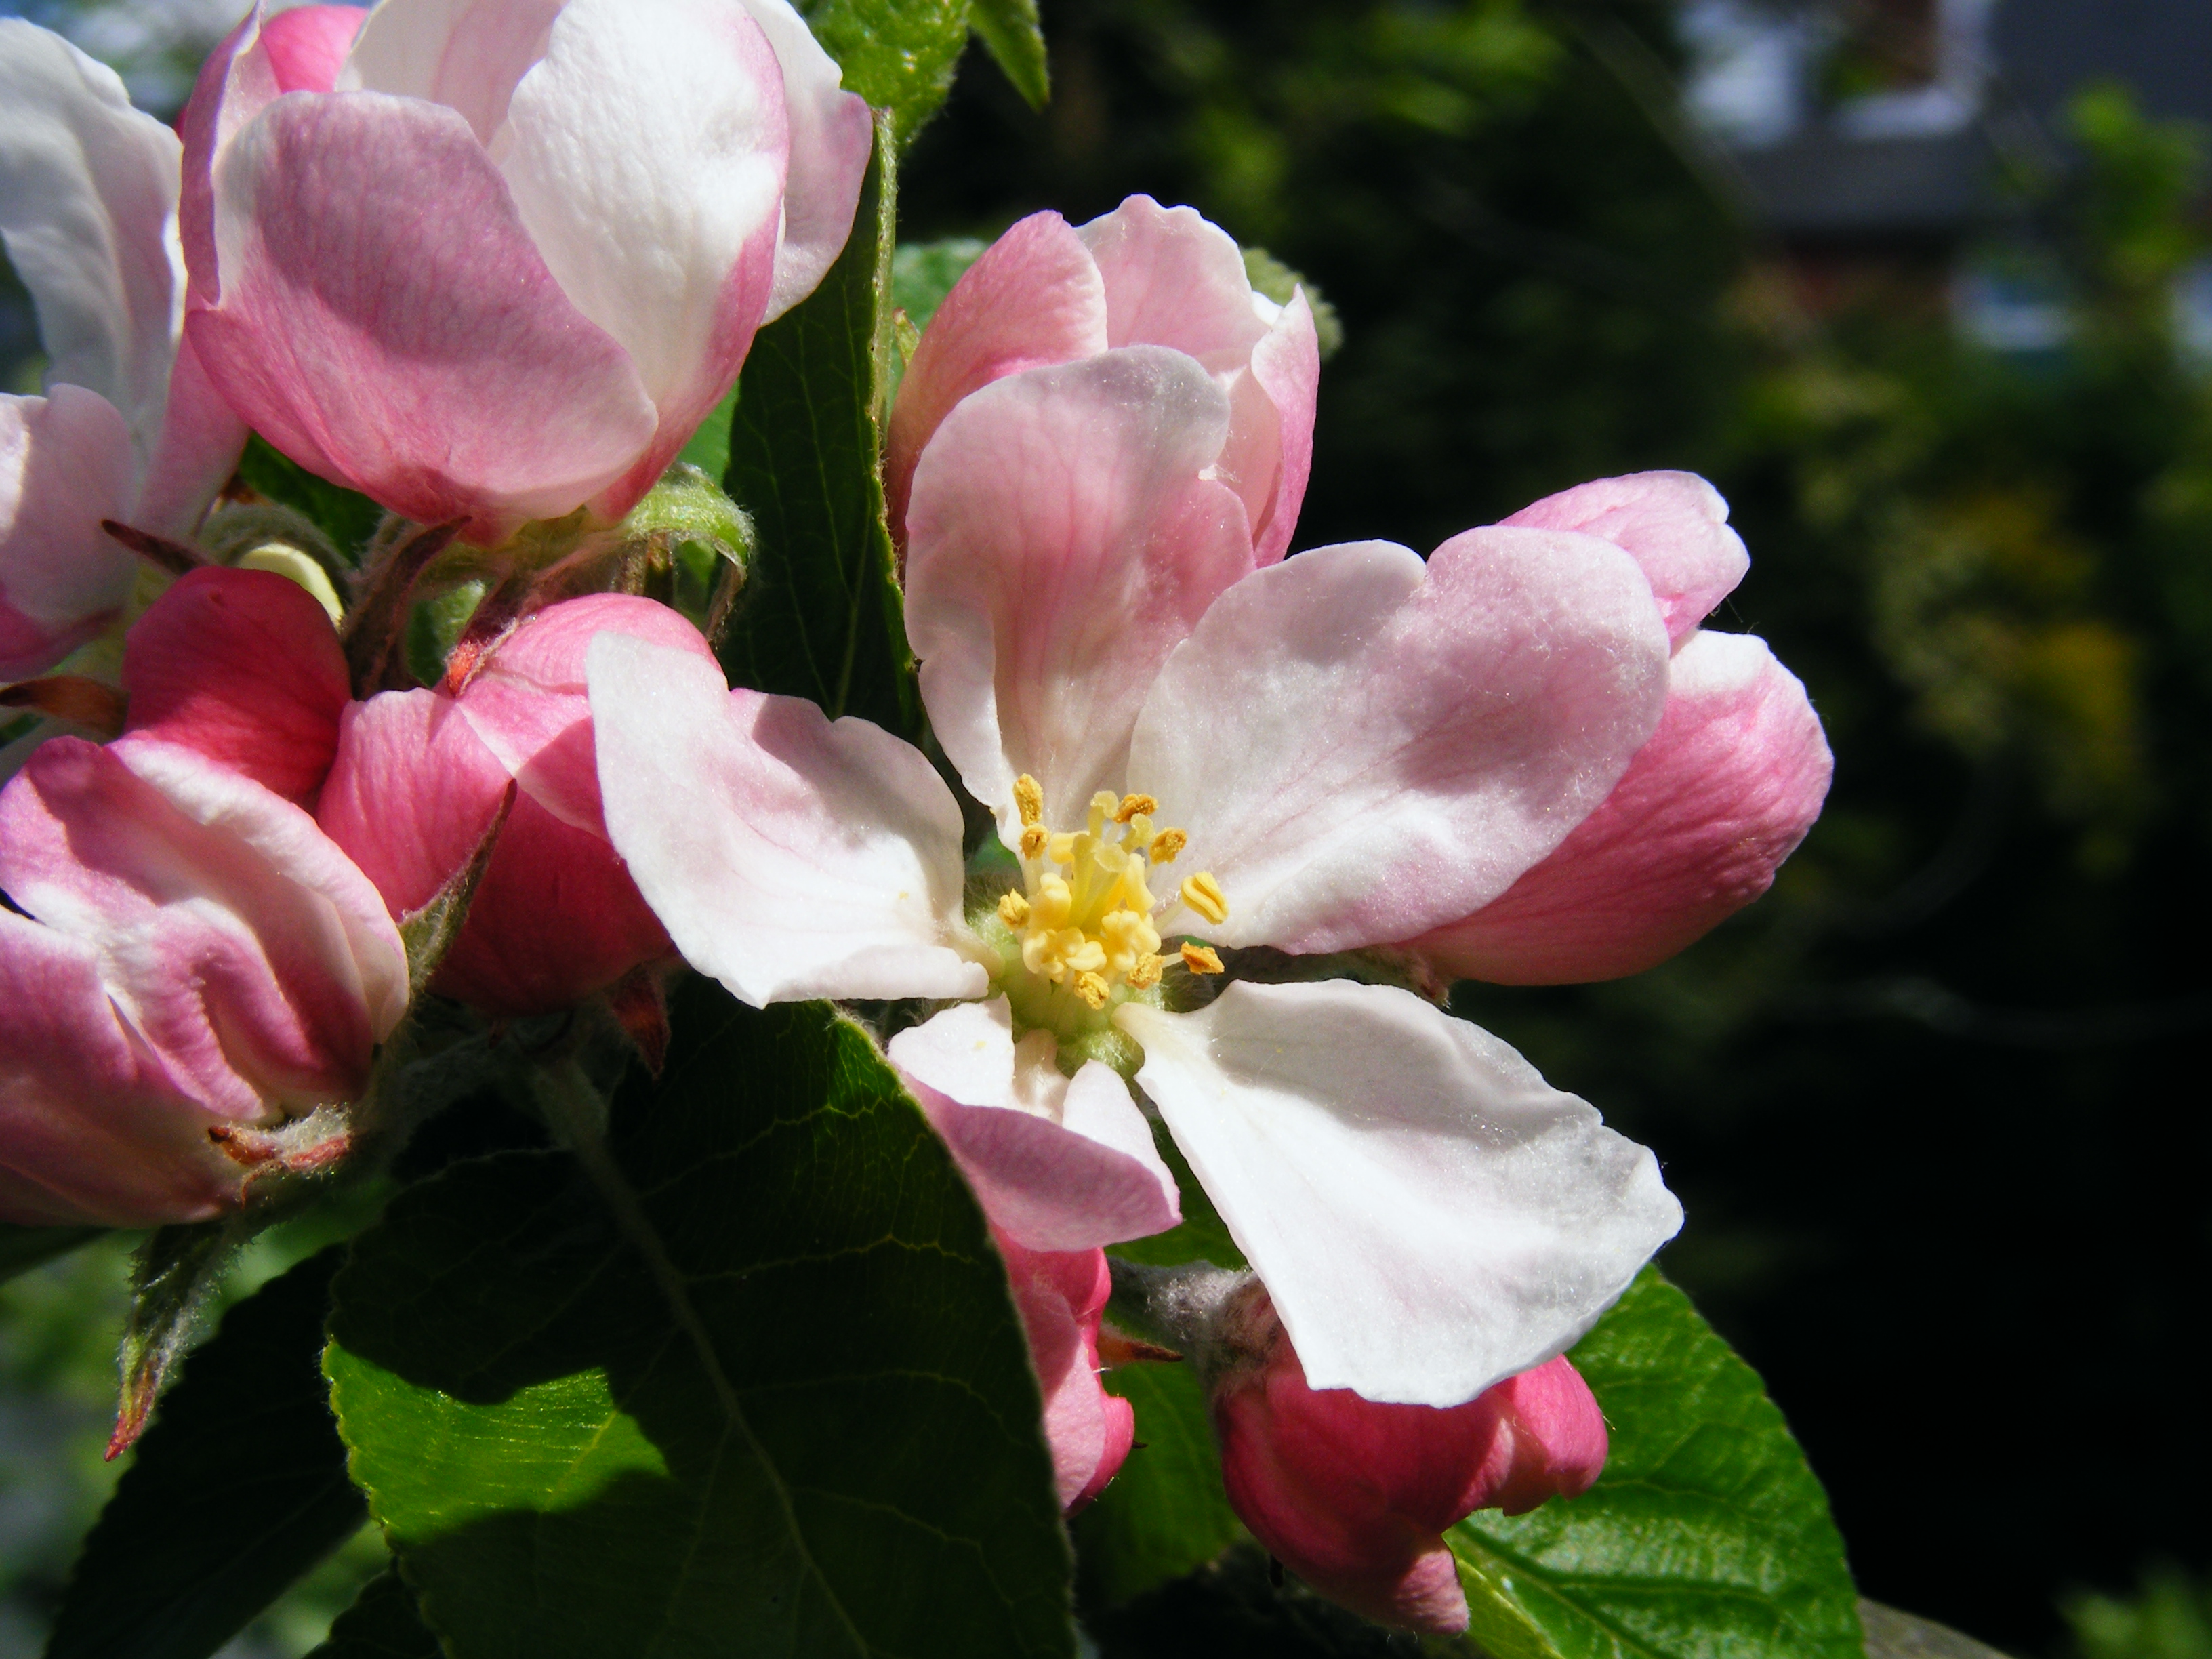 Browse And Share Apple Blossom Pics Image Wallpaper On ImgHD